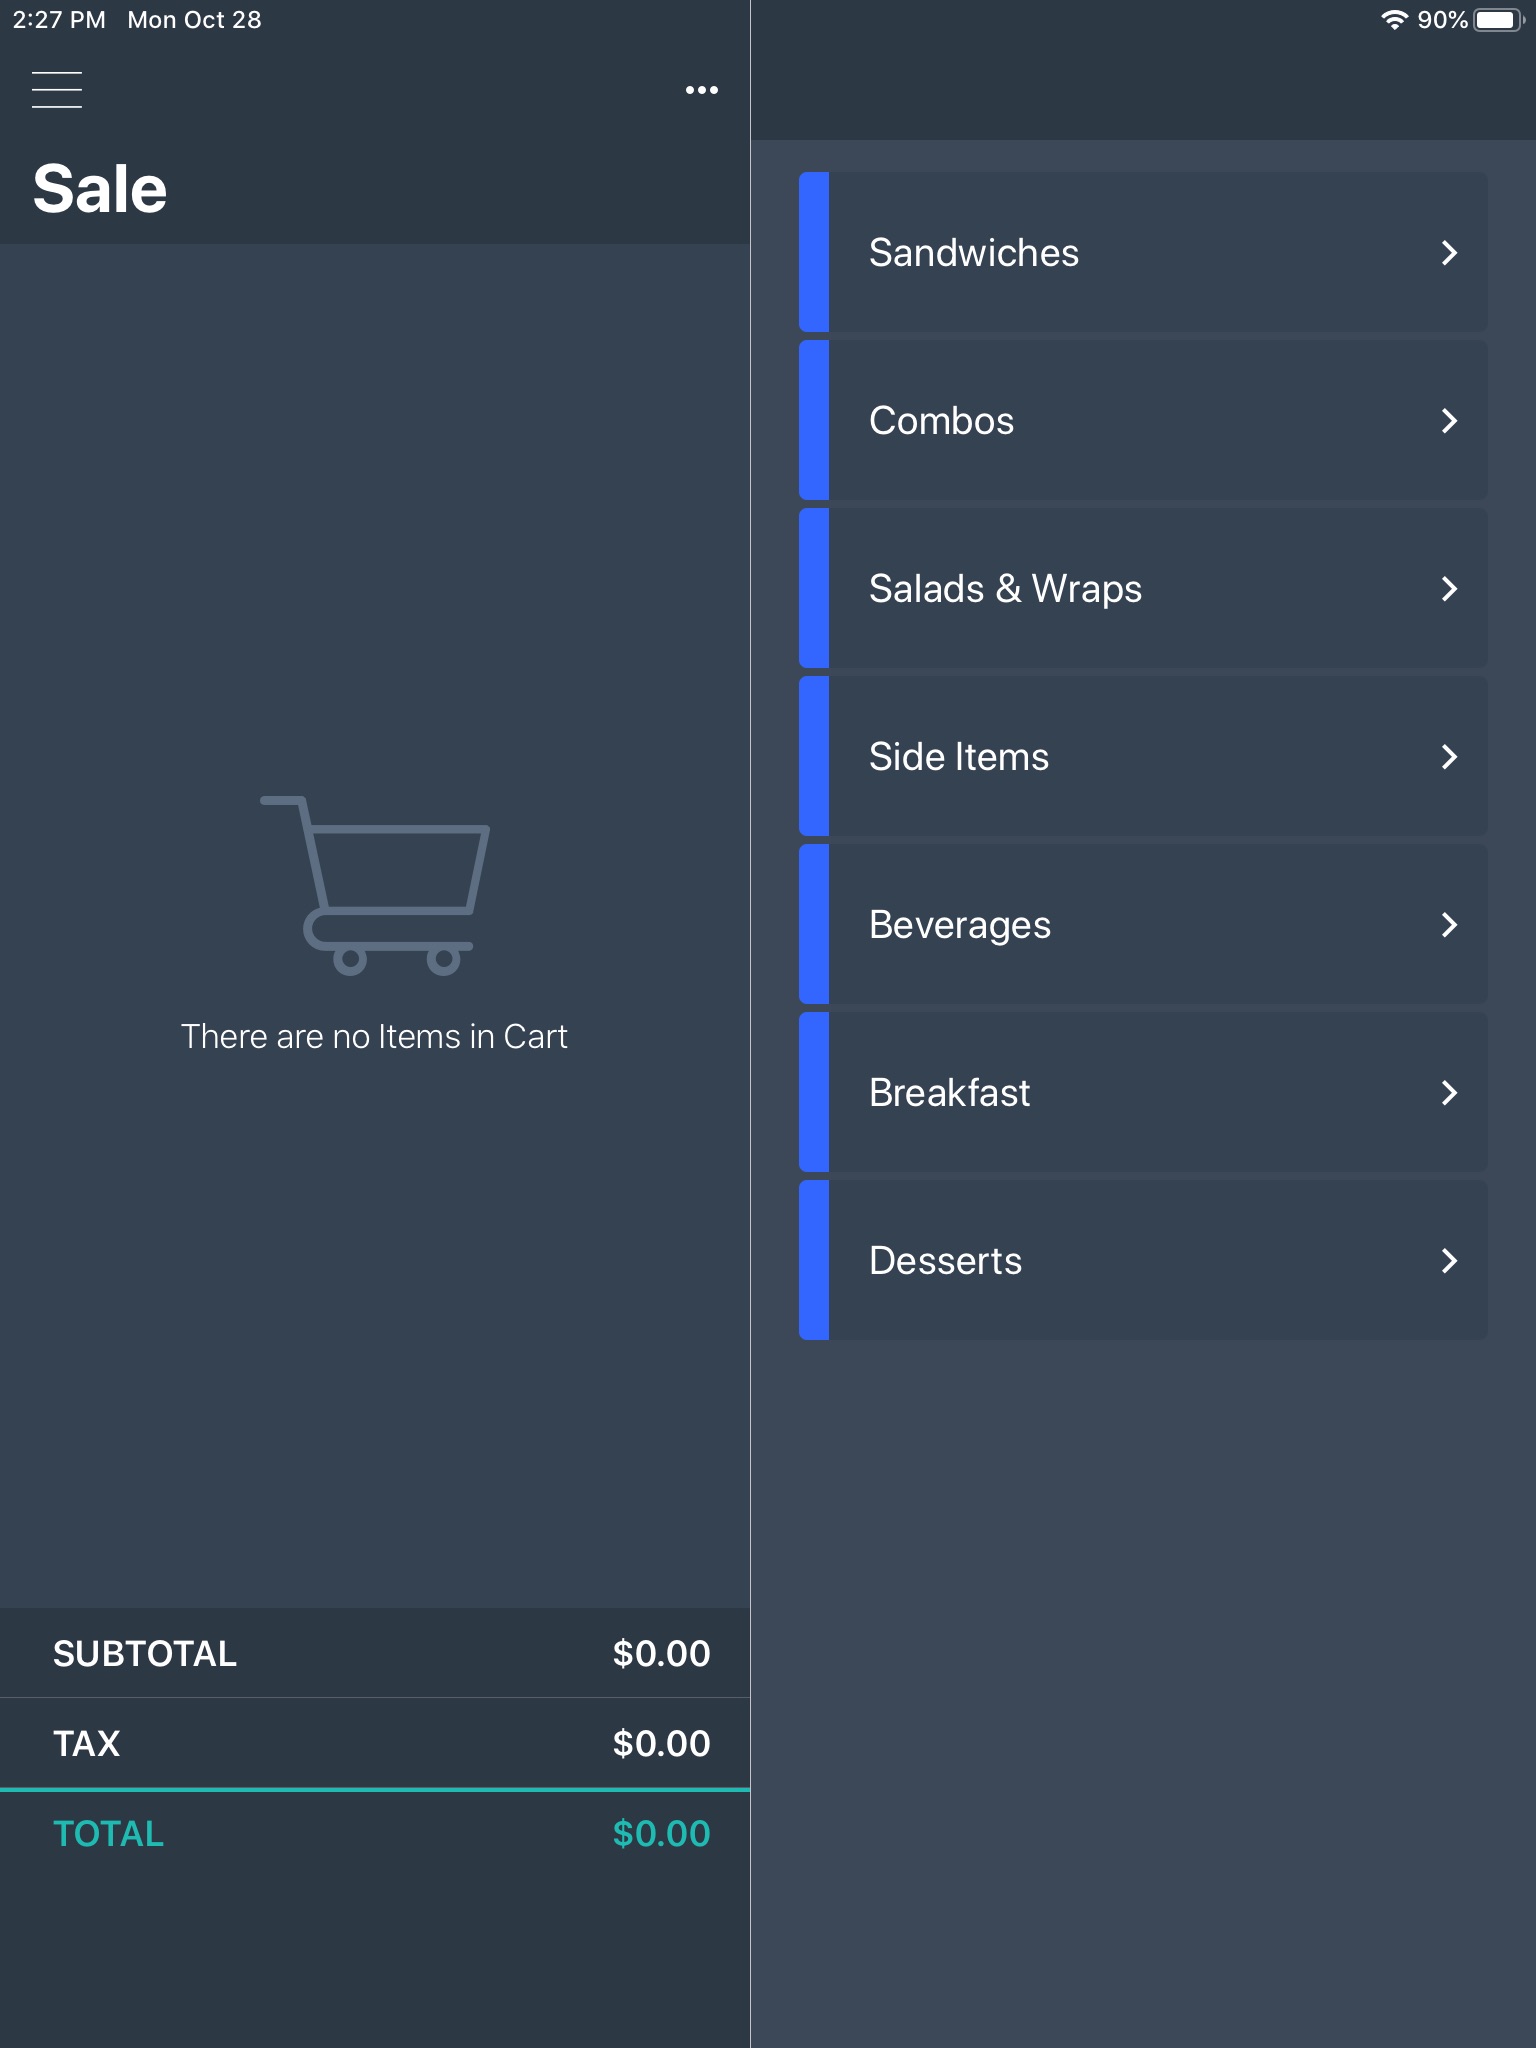 iSell - Mobile Point of Sale screenshot 2